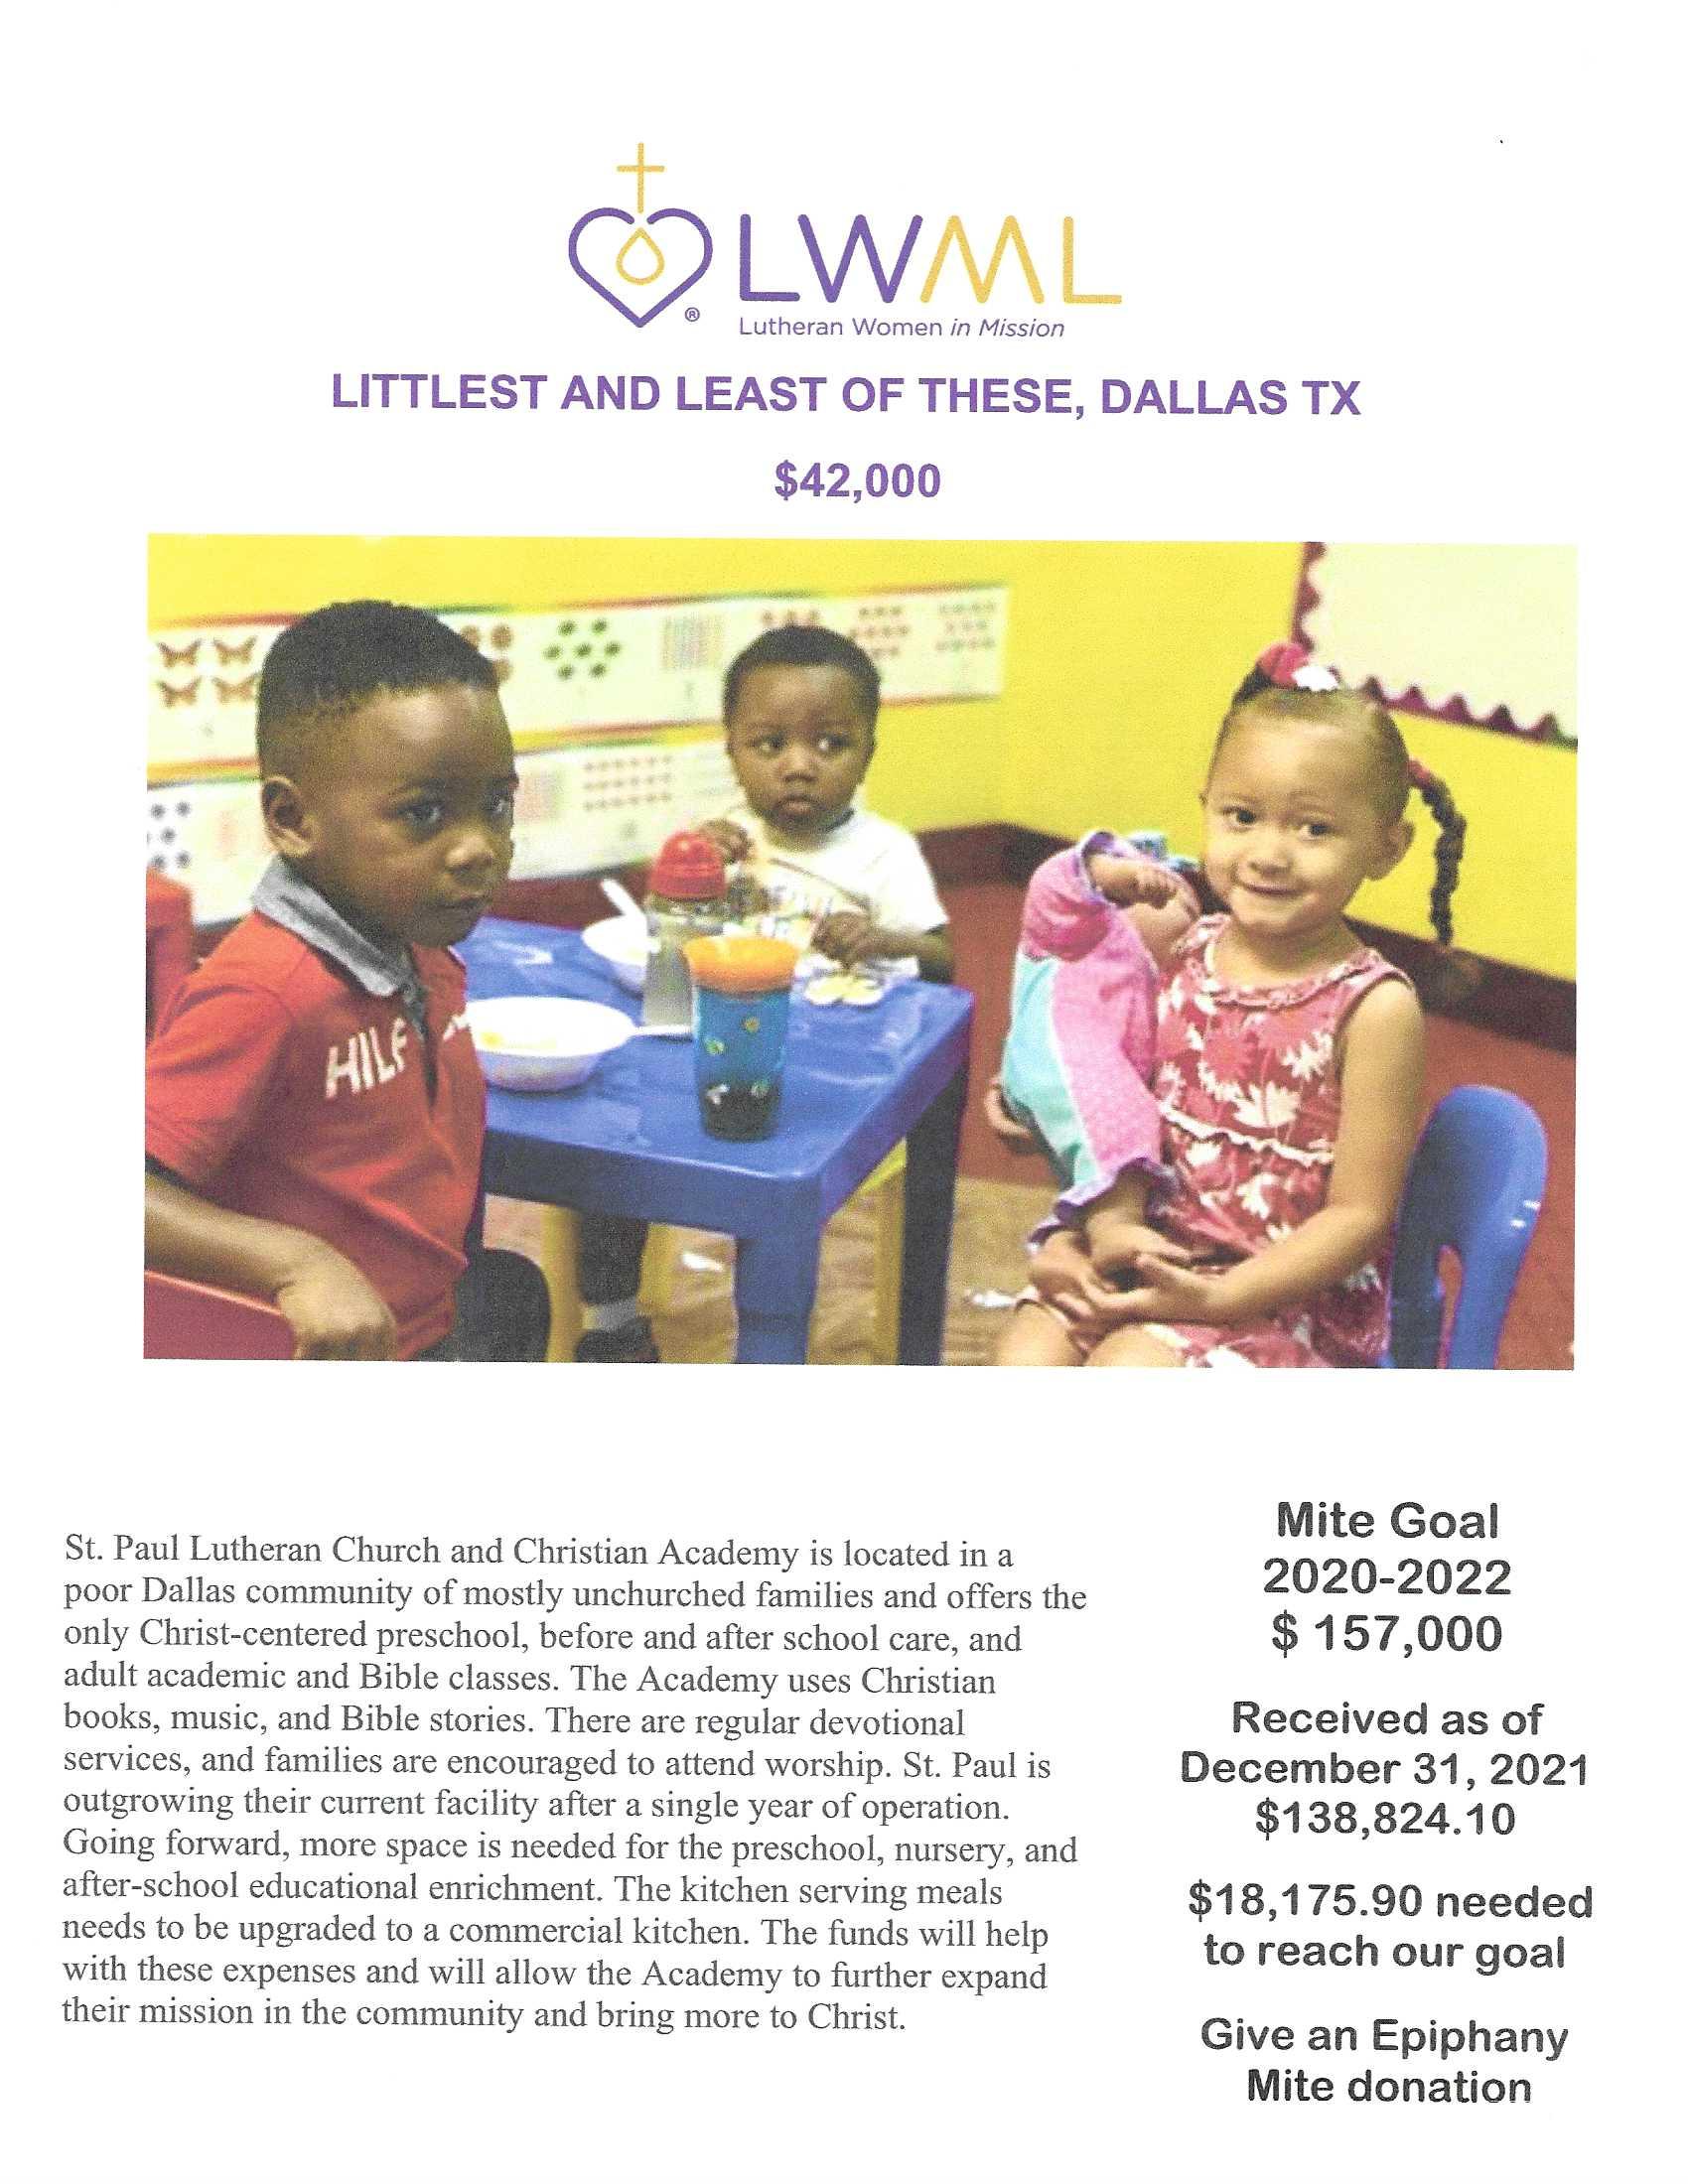 The mission grant poster about the St. Paul Lutheran Church and Christiam Academy in Dallas, TX.